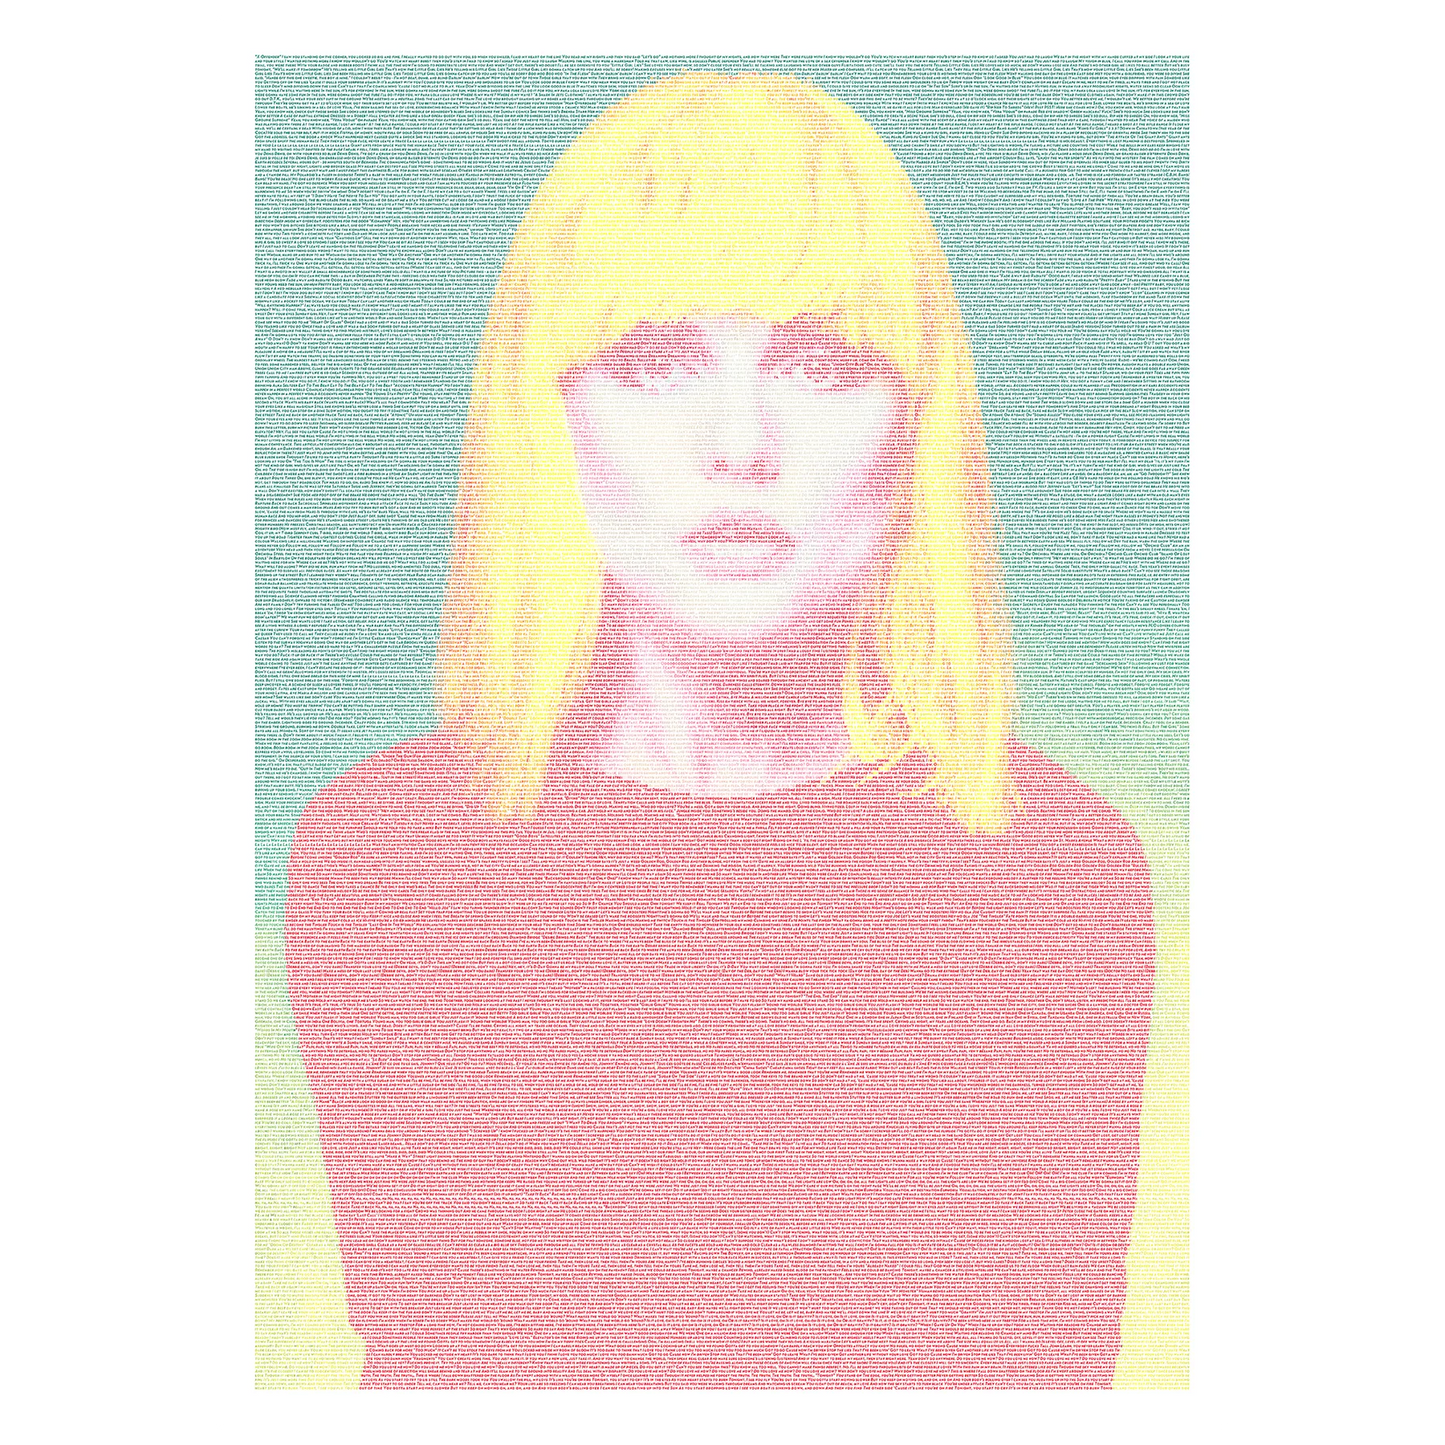 A red, green and yellow typographic portrait of Debbie Harry, created form Blondie lyrics.